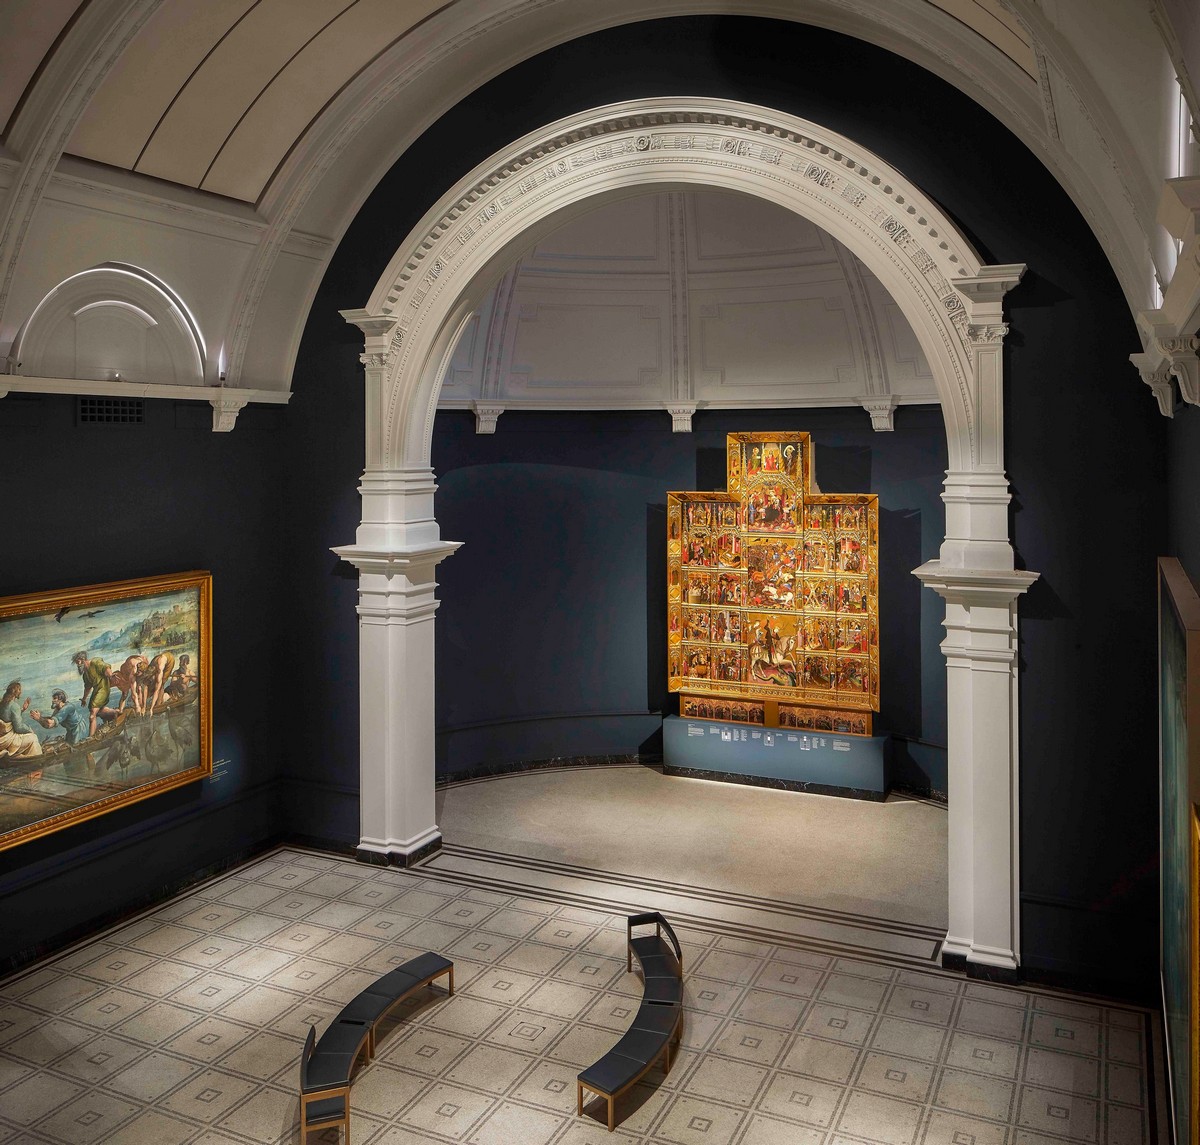 Ahead of re-opening, London's V&A museum unveils new Raphael gallery